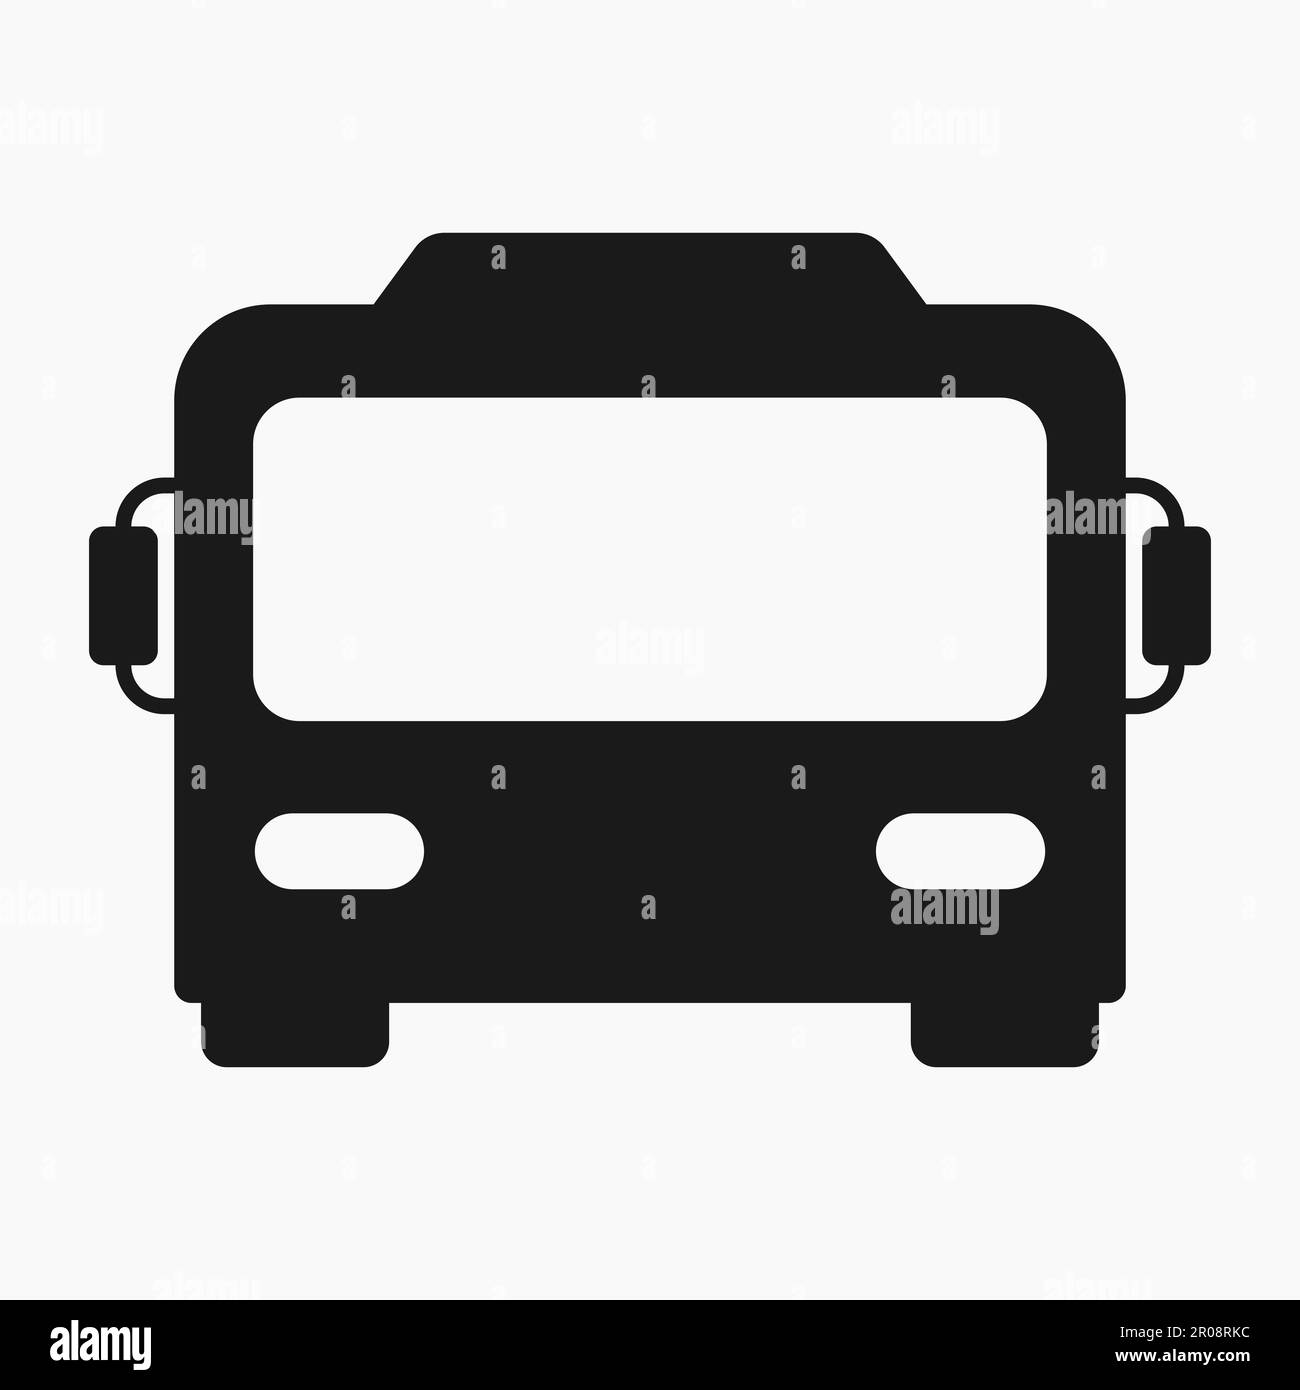 public transport bus front view shape icon vector illustration Stock Vector